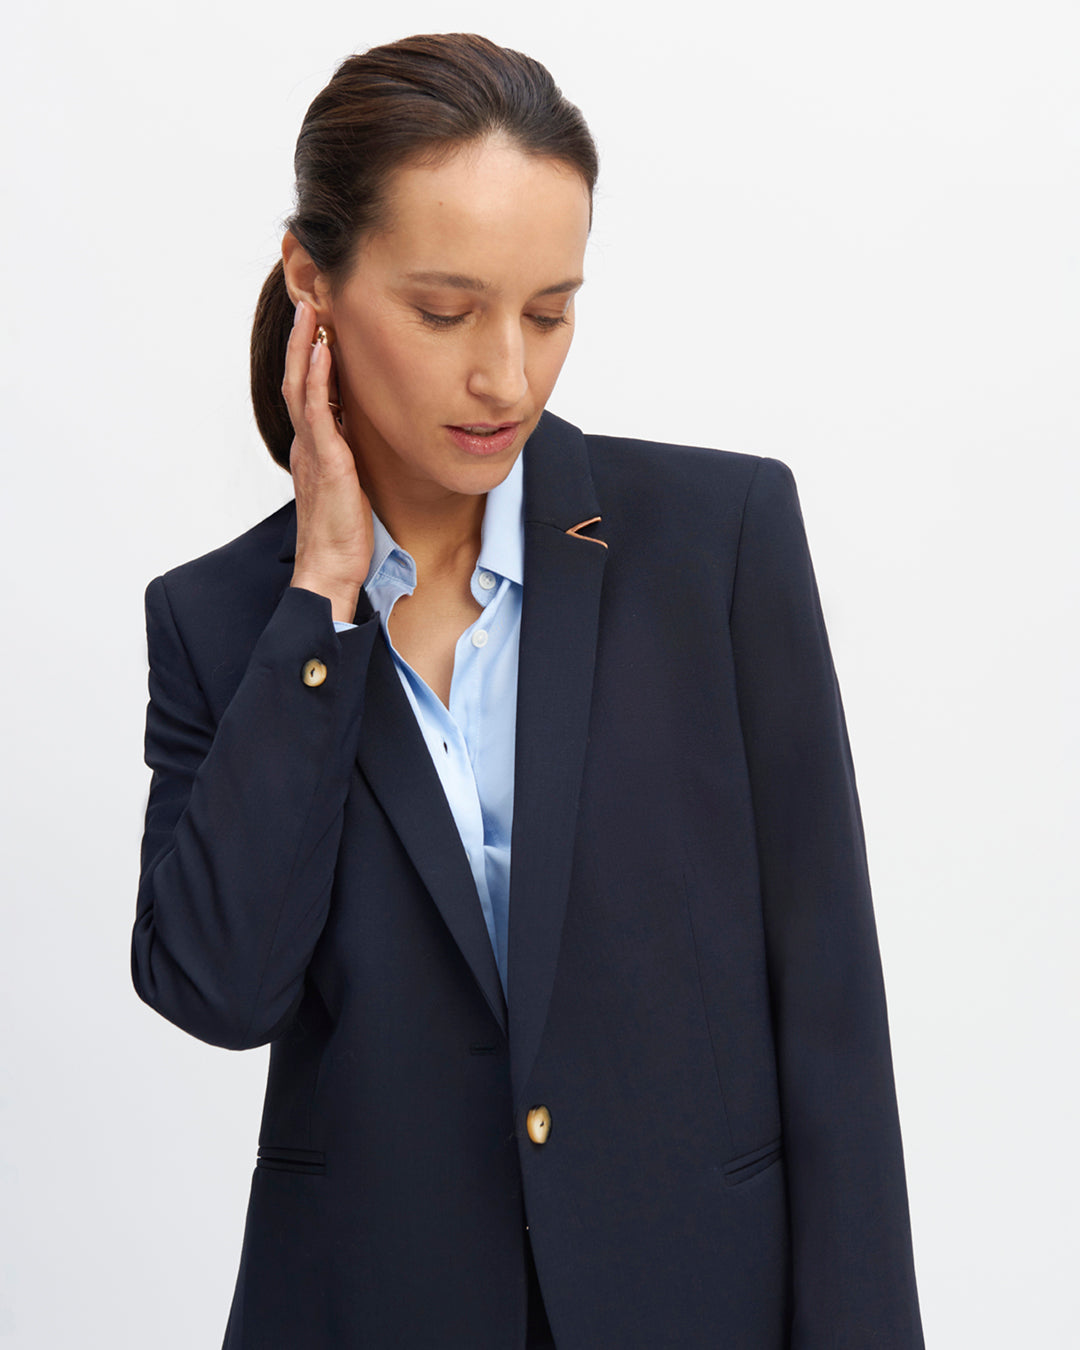 Tailored-blazer-jacket-navy-blue-cropped-neck-tailored-length-under-the-bottom-two-pockets-pass-pocketed-two-pockets-inner-entirely-lined-bottom-buttoned-sleeves-buttoned-camel-17H10-tailored-for-women-paris-